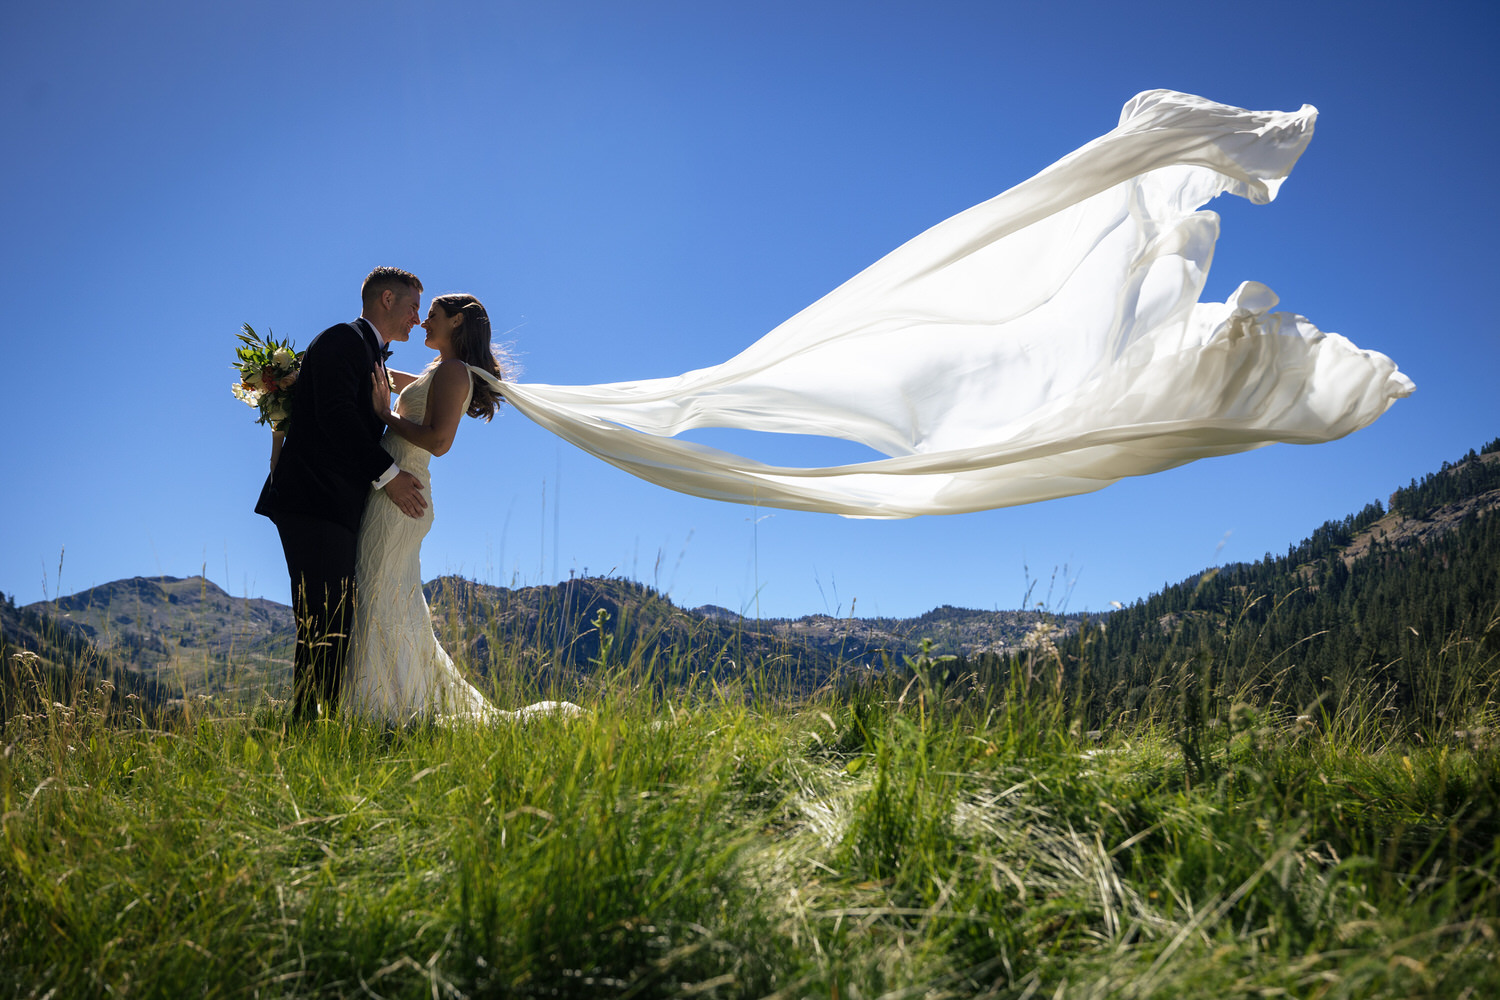 As the couple embraces, a bride's white chiffon bridal wings fly up into the air behind her.